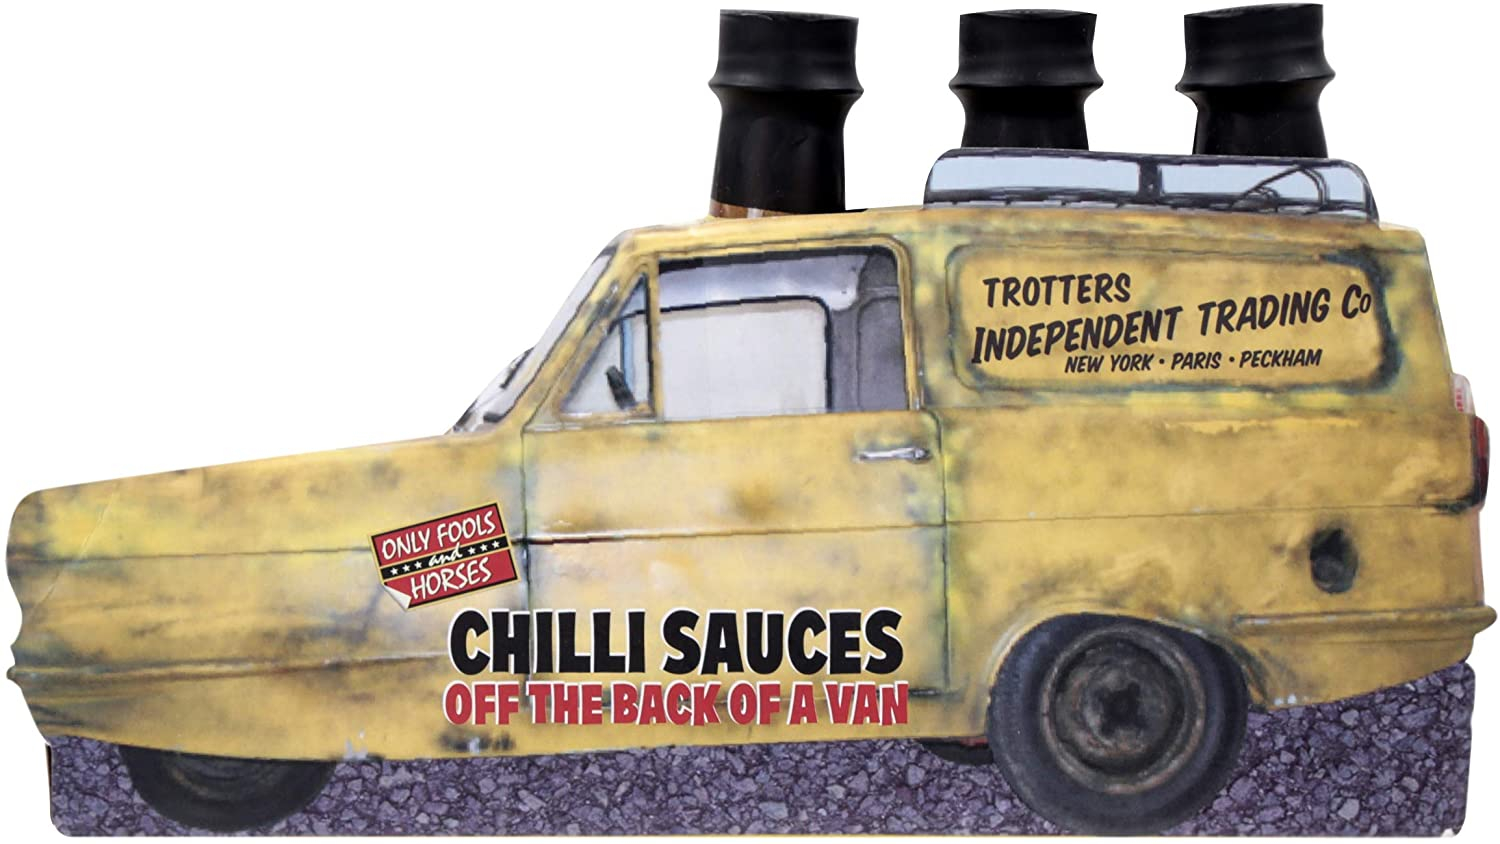 Only Fools & Horses Chilli Sauces Off the back of the